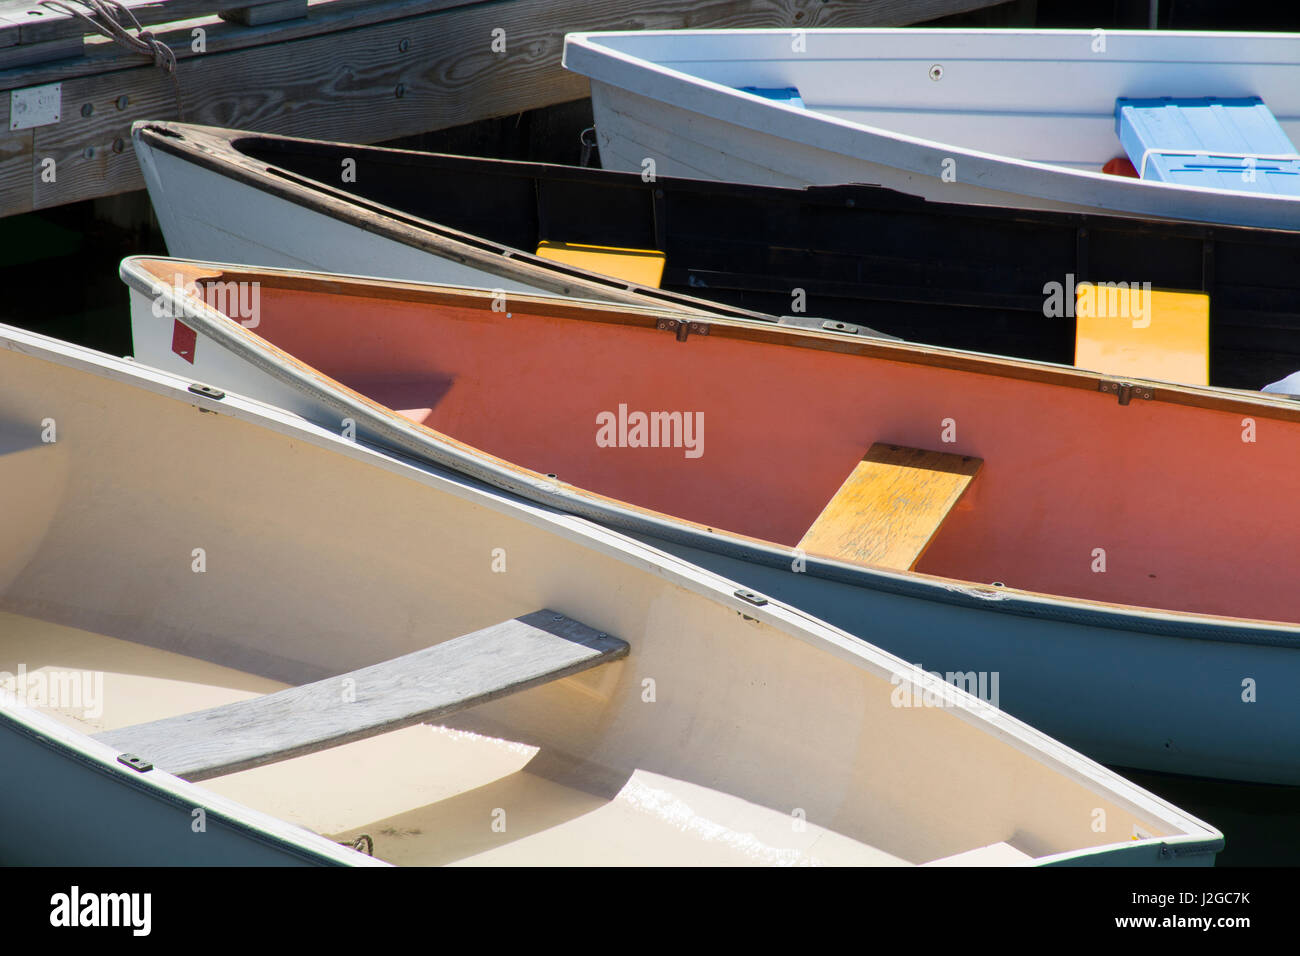 Maine, Rockland. Colorful boats in Rockland marina. Stock Photo